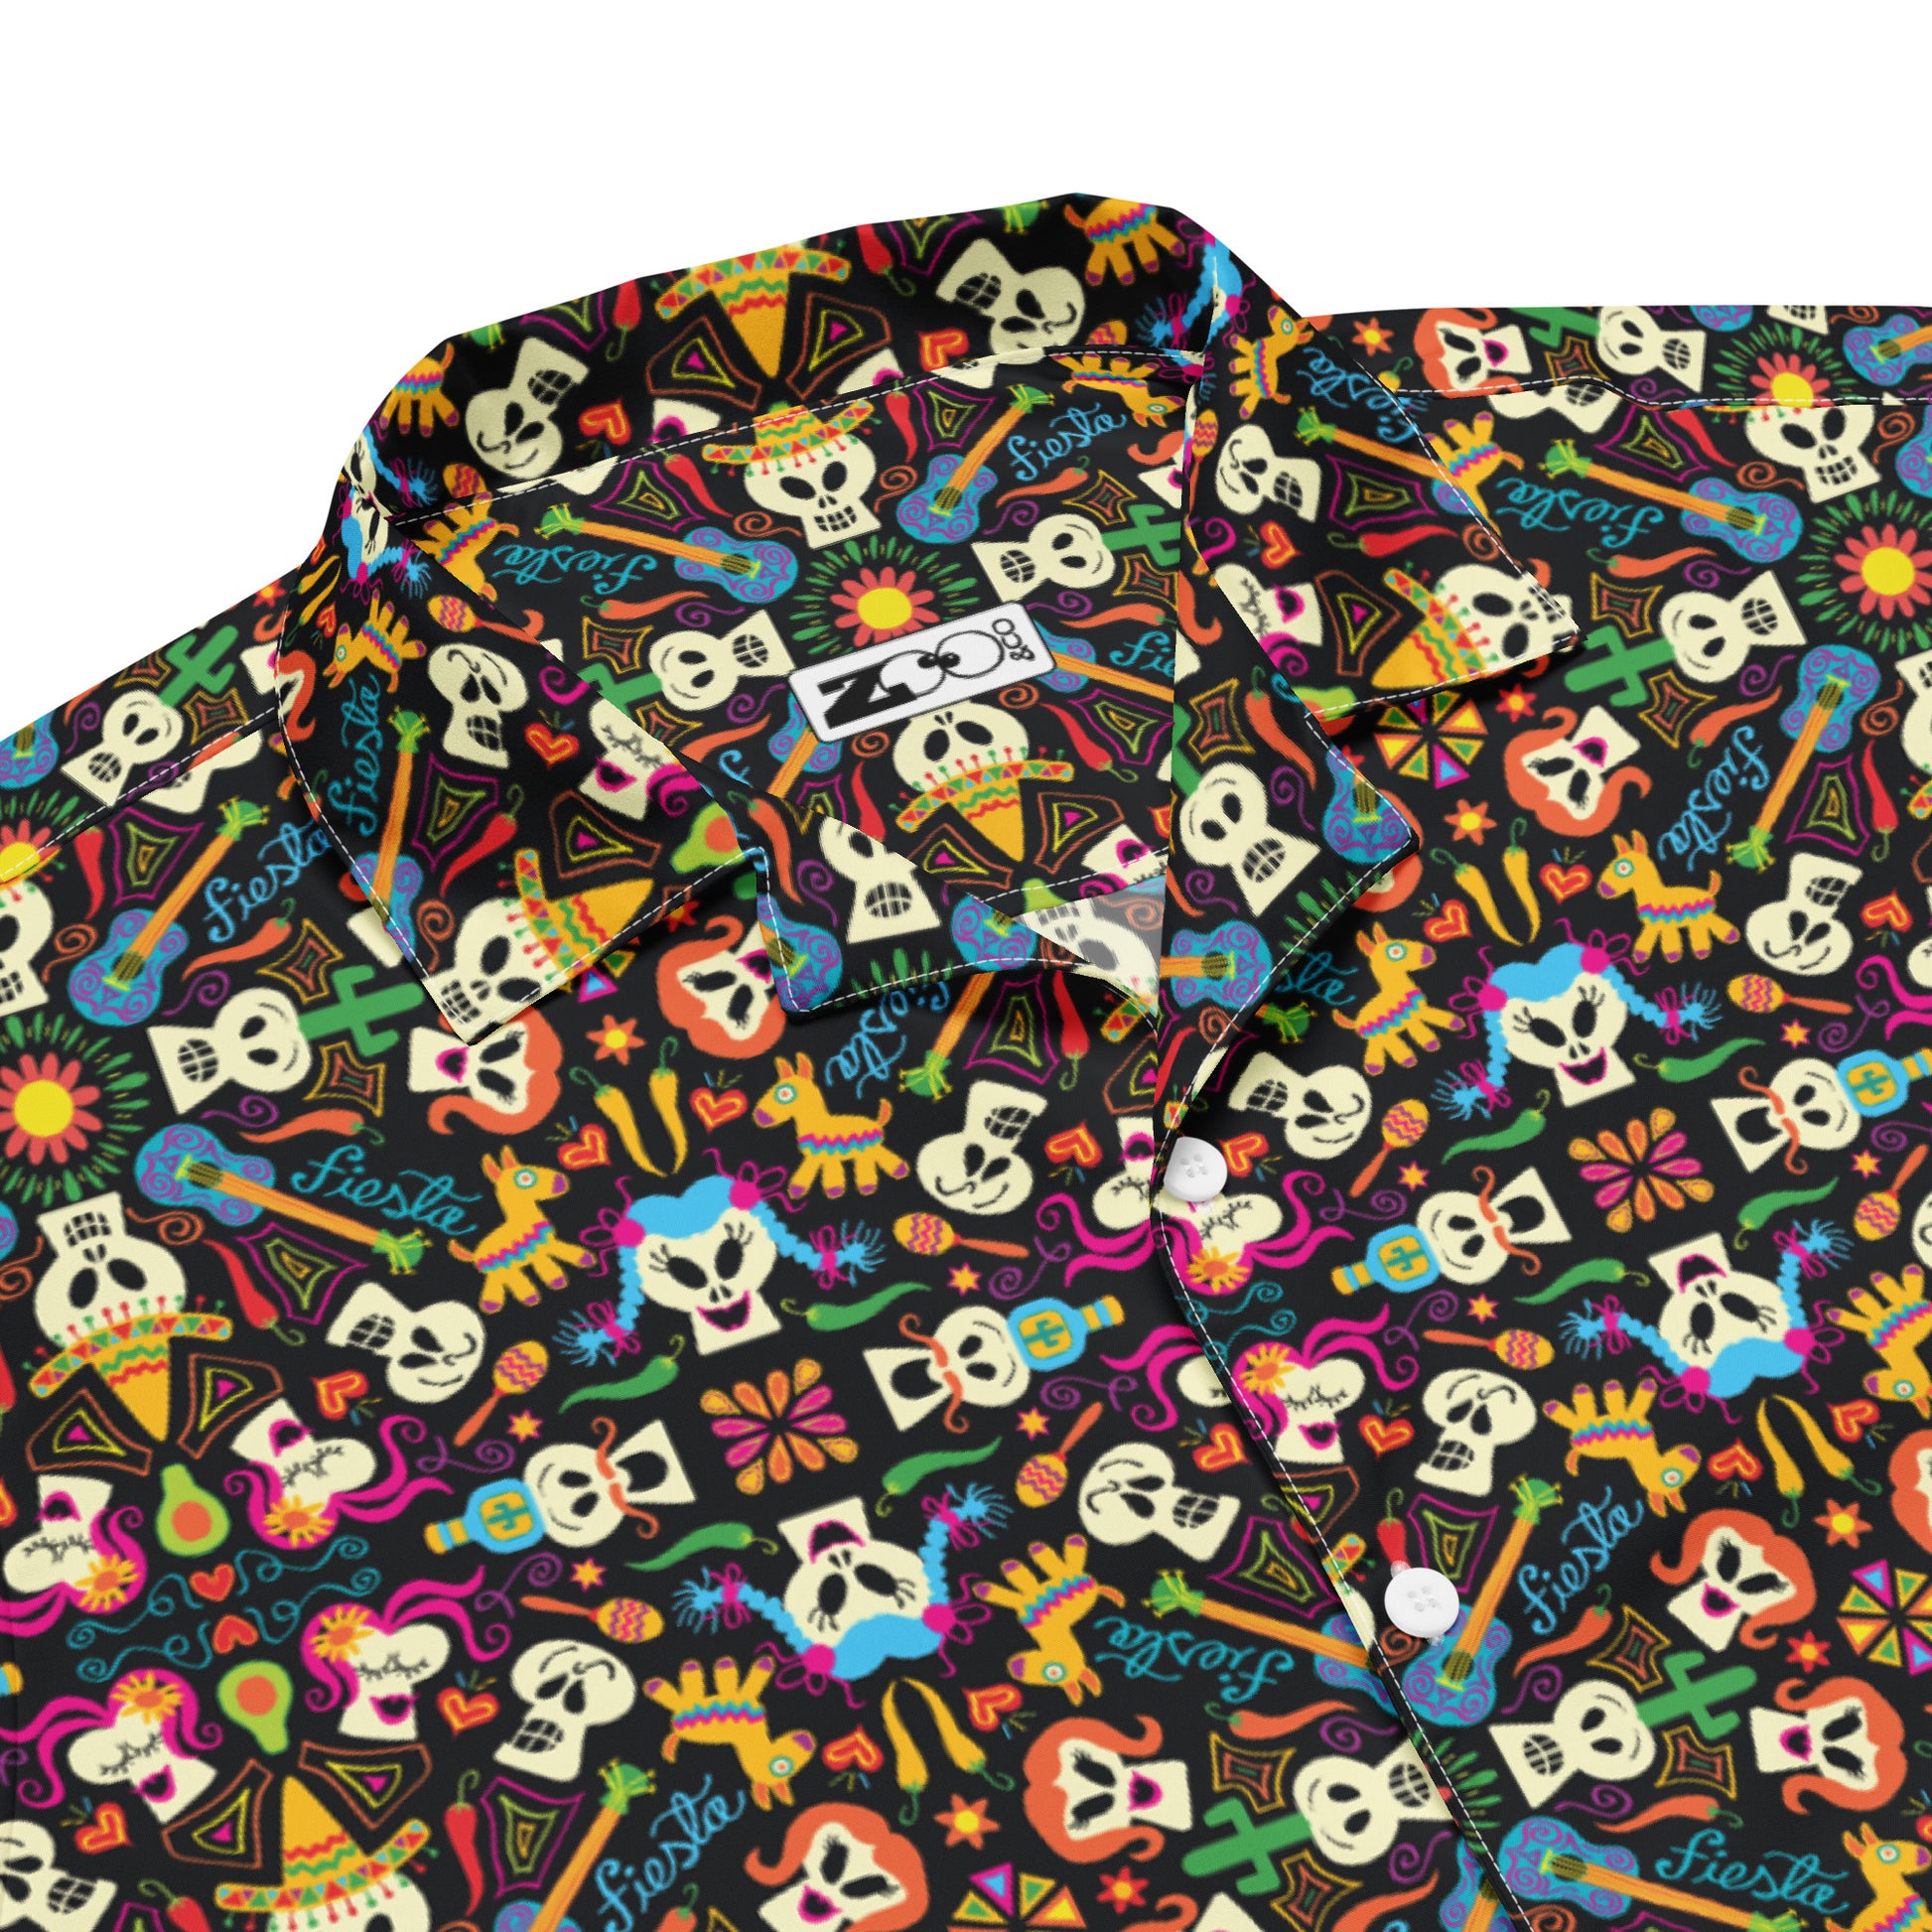 Day of the dead Mexican holiday Unisex button shirt. Product details